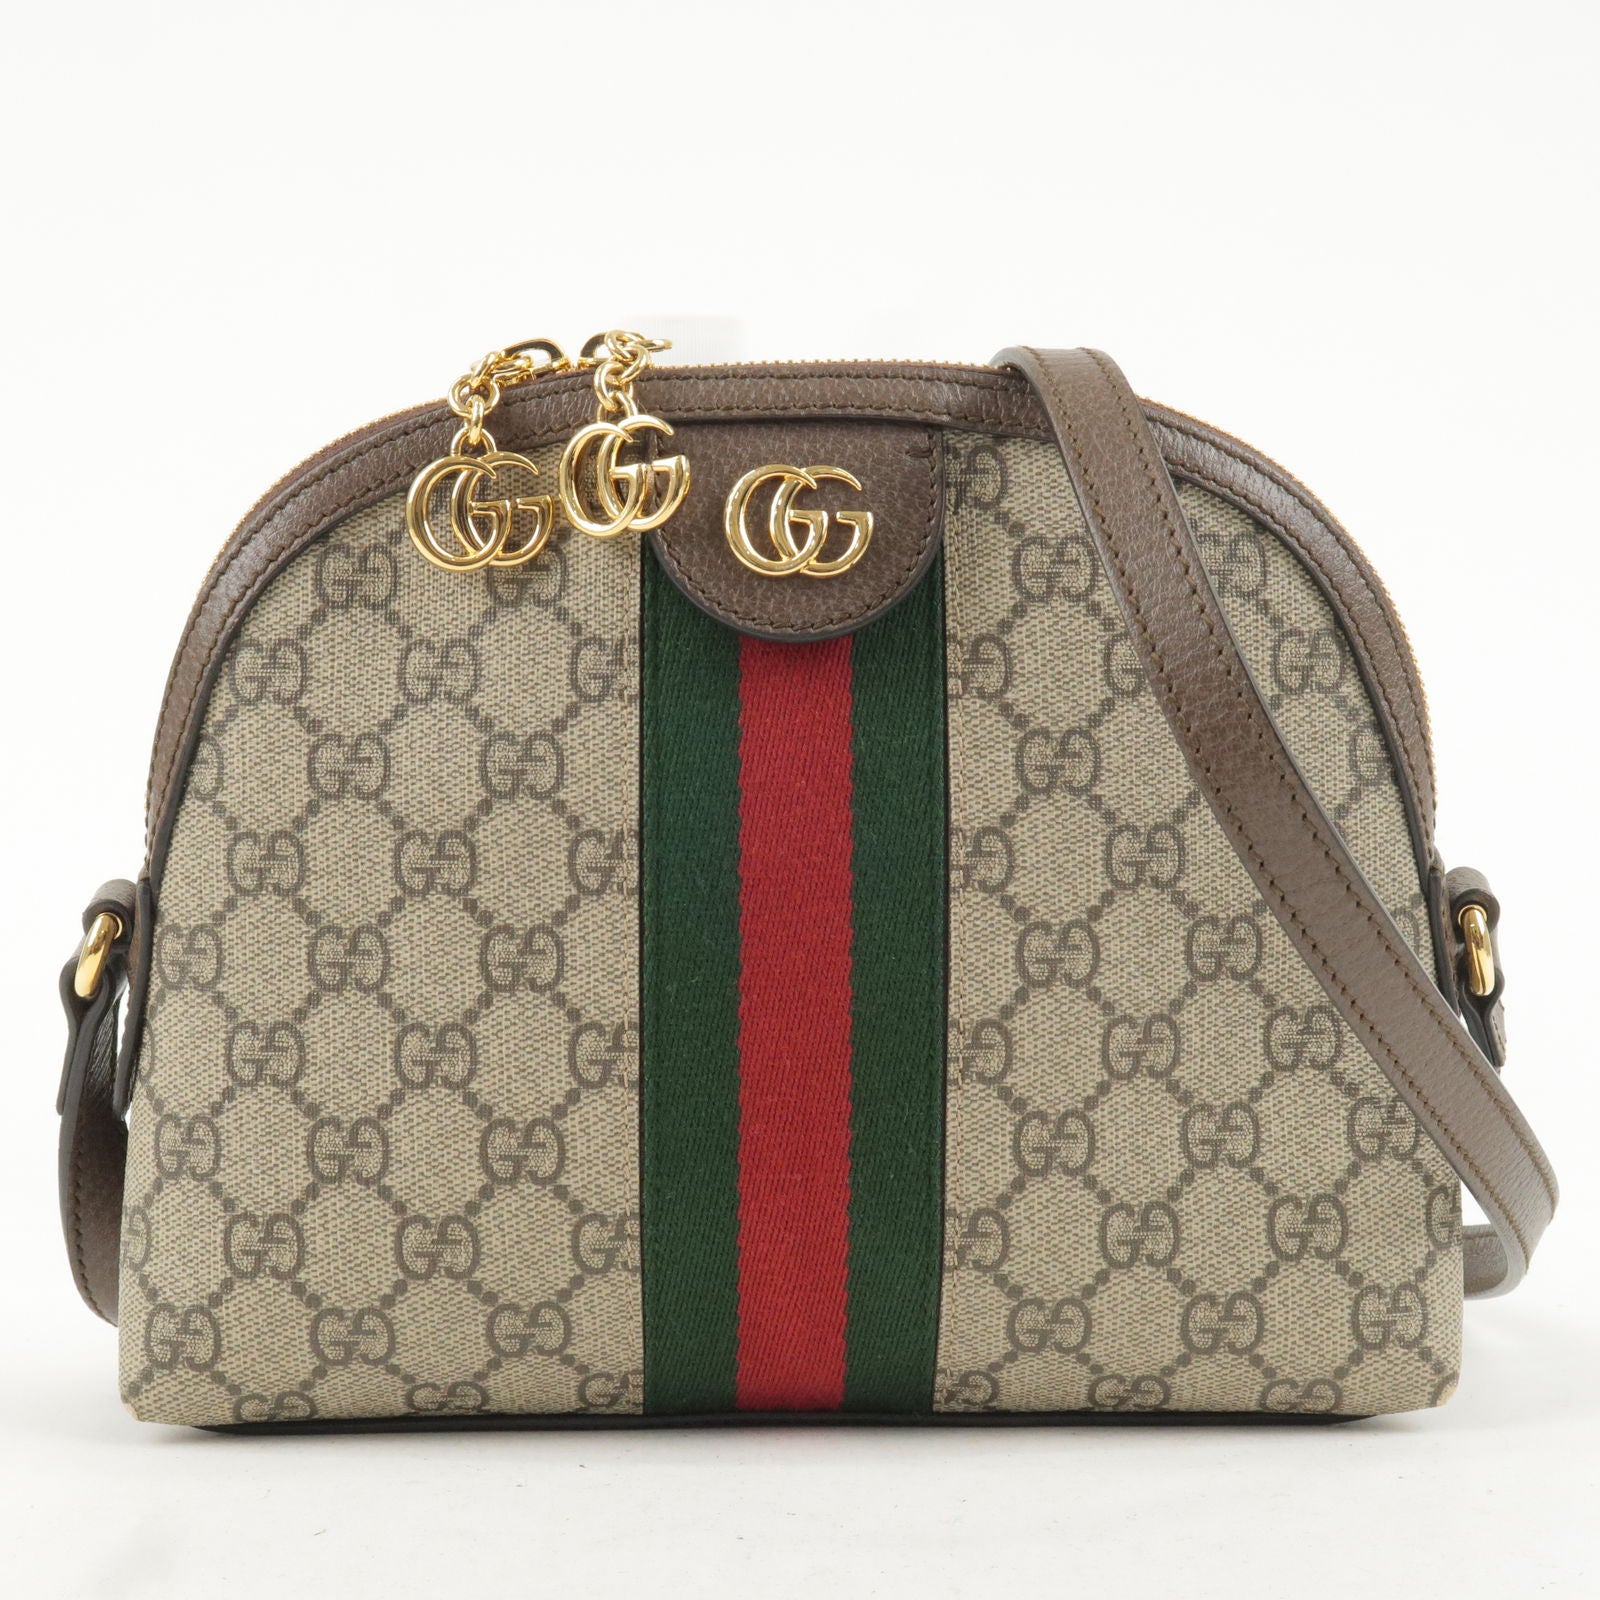 Gucci - Ophidia Gg-Canvas Shoulder Bag - Womens - Beige Multi for